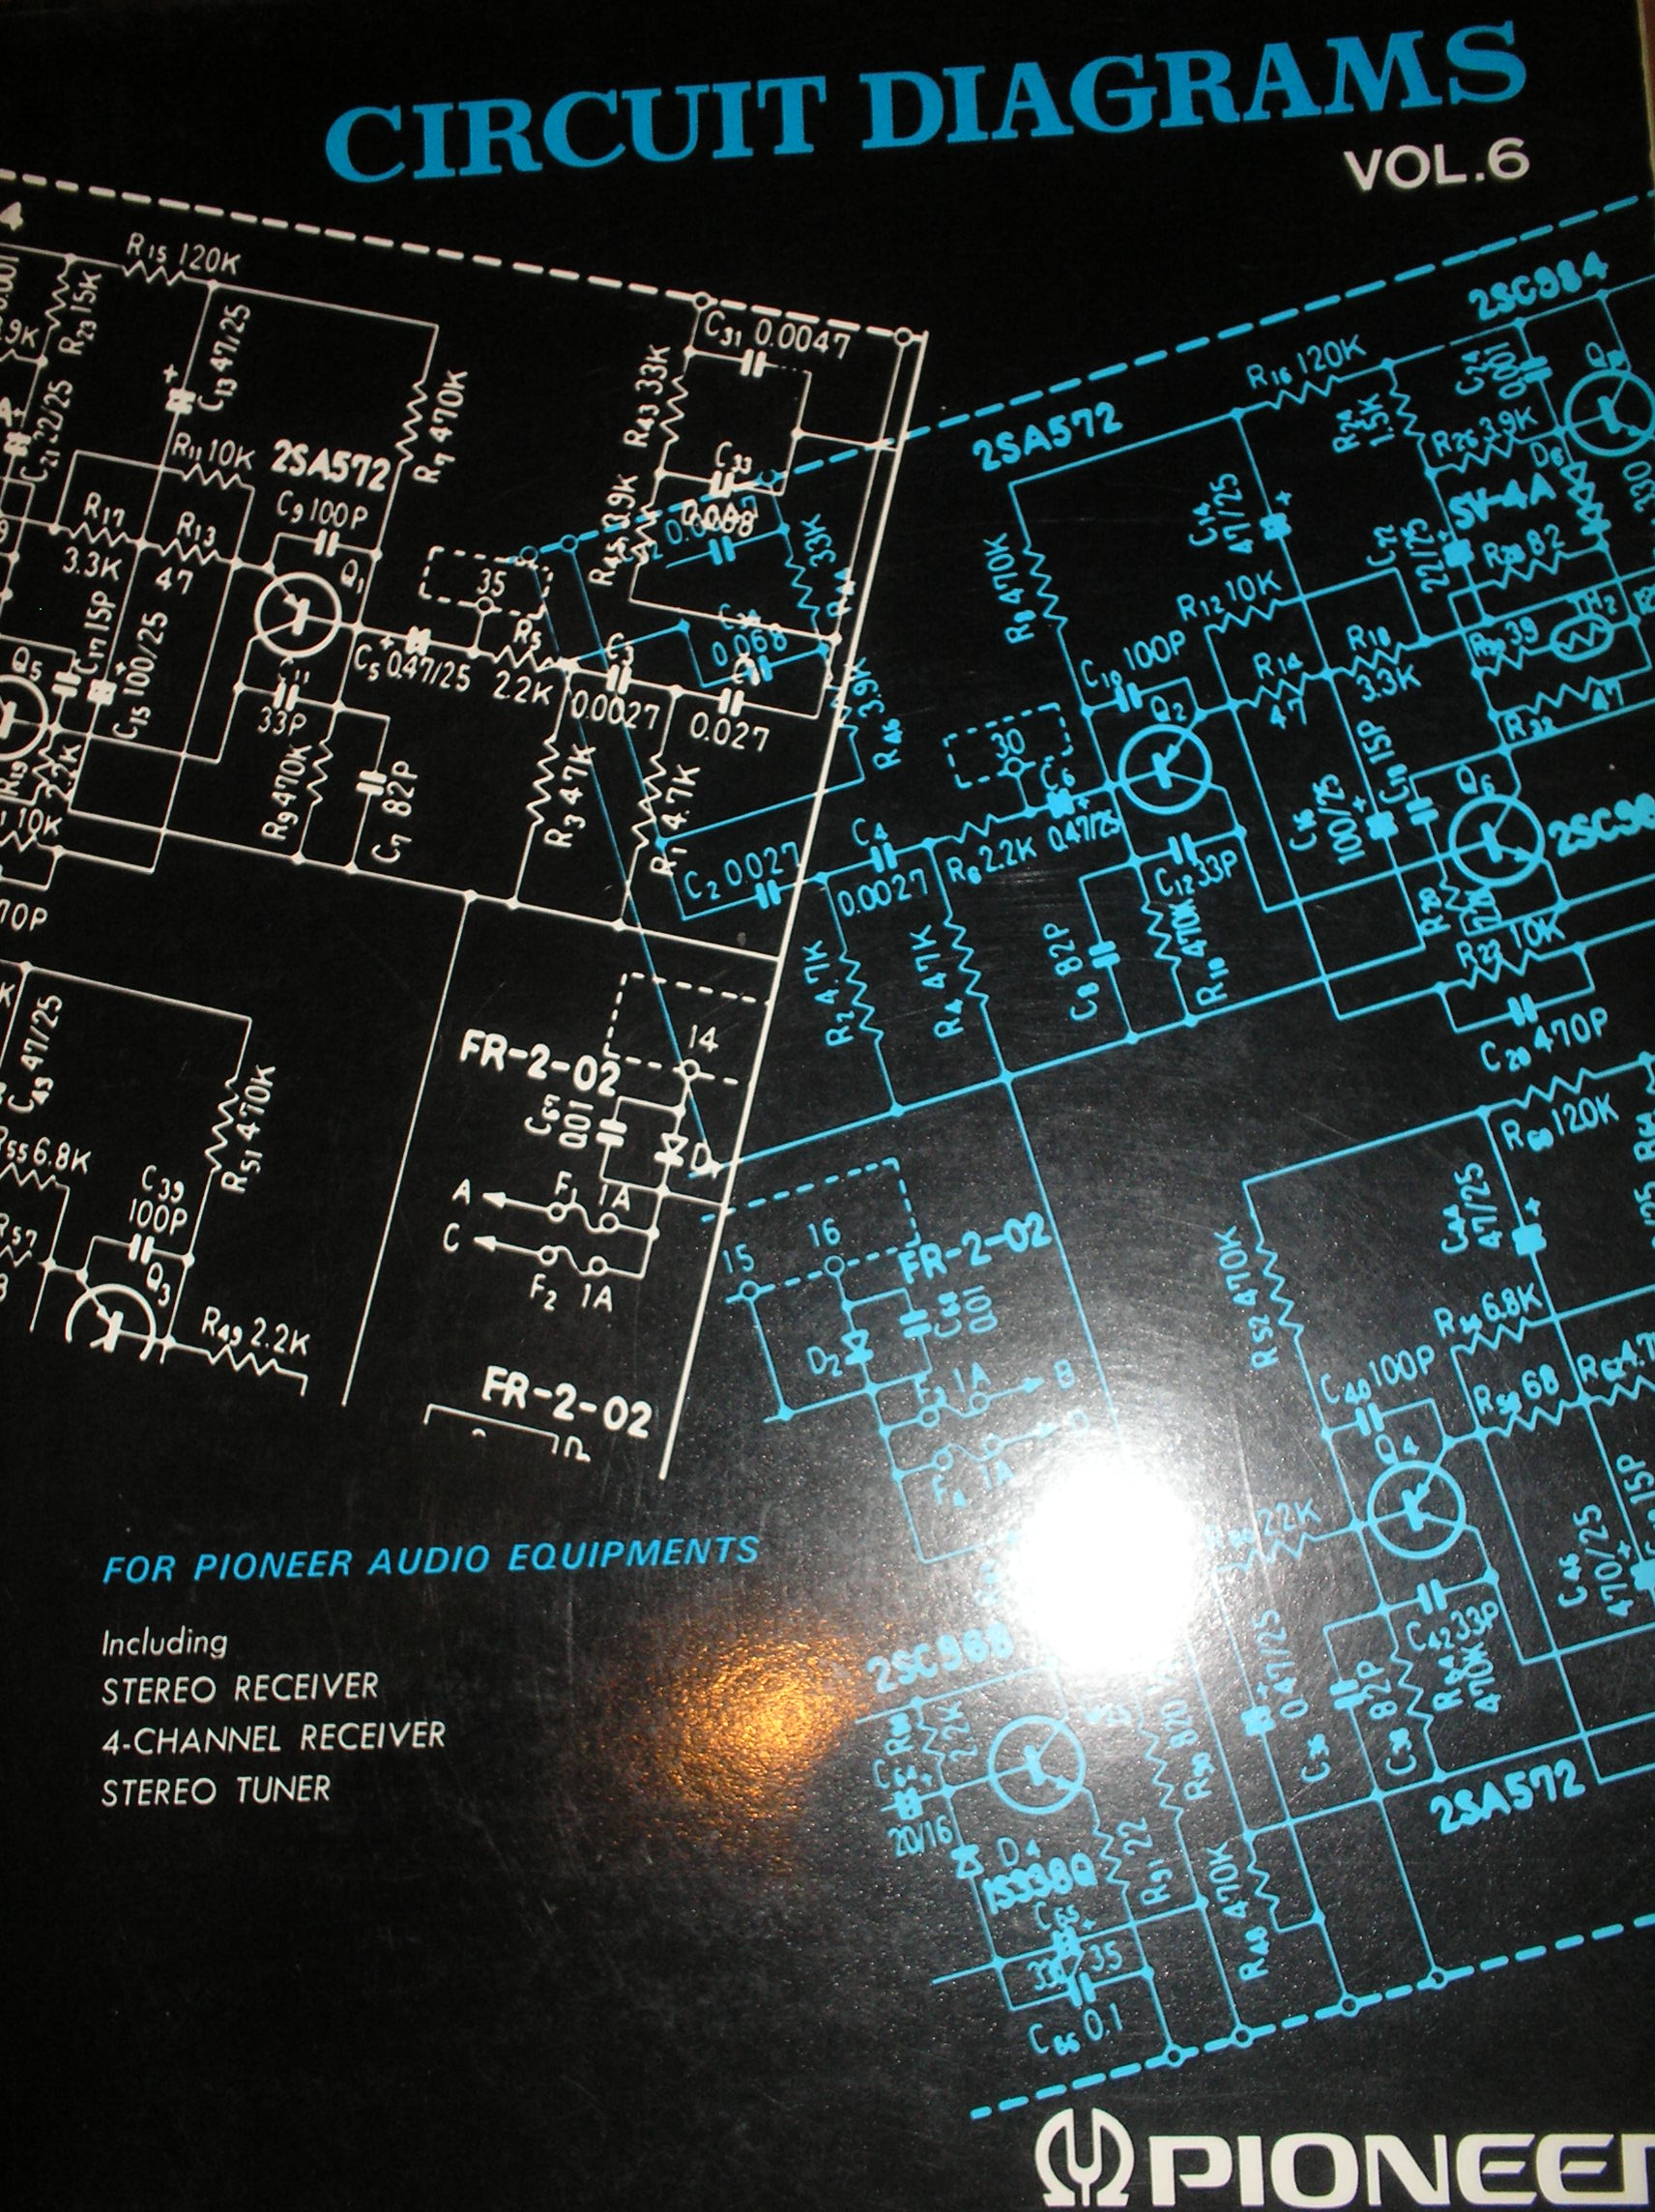 KX-505 Stereo Receiver fold out schematics.   Book 6